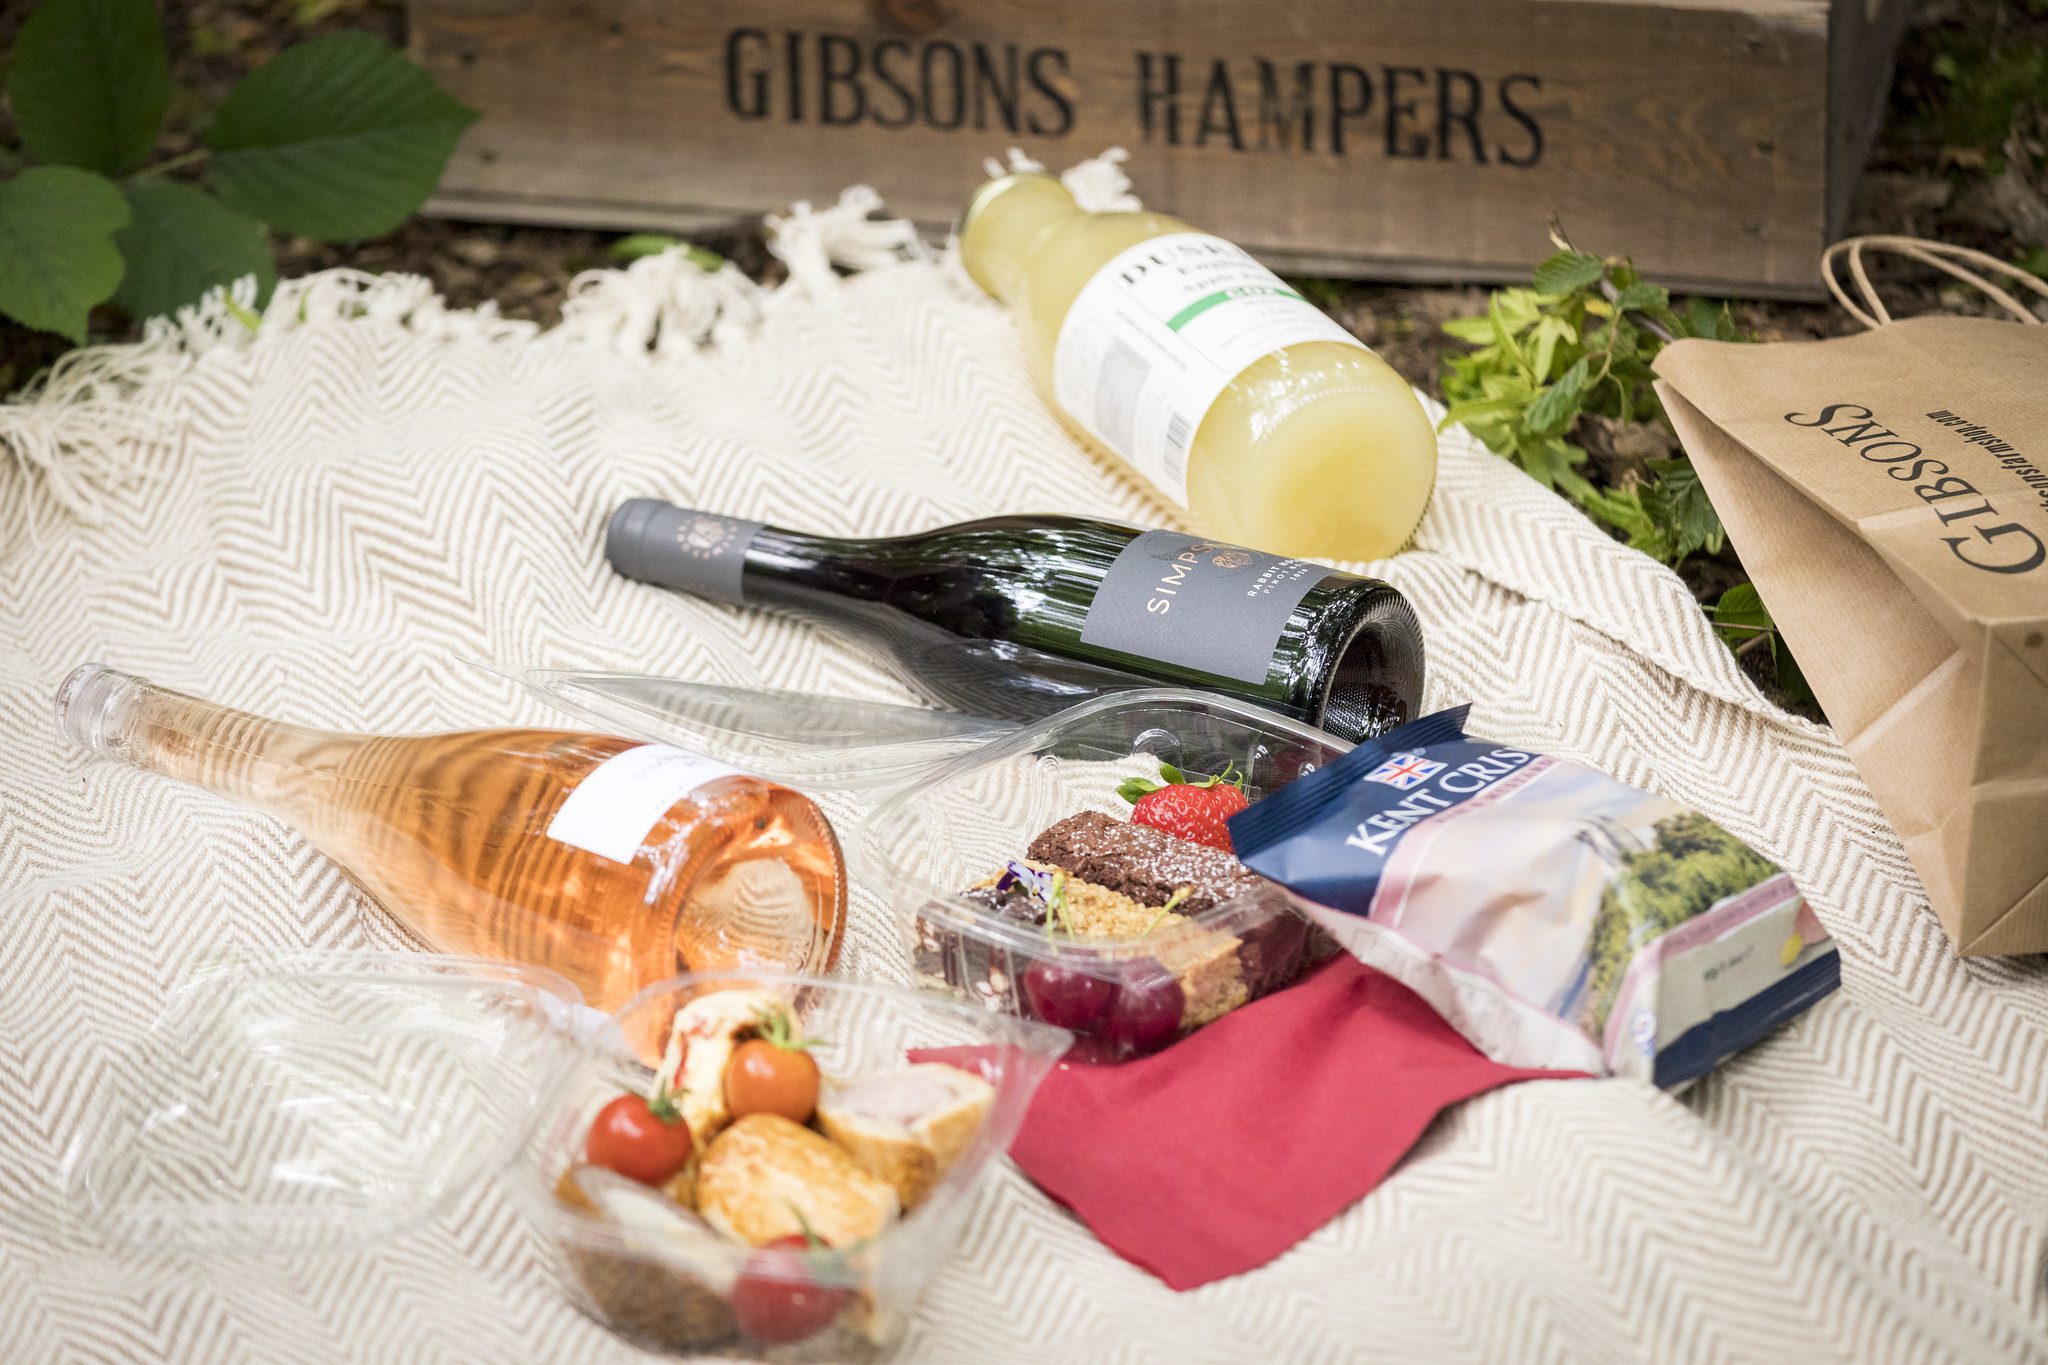 Close-up on picnic blanket with wine, cakes and crisps.